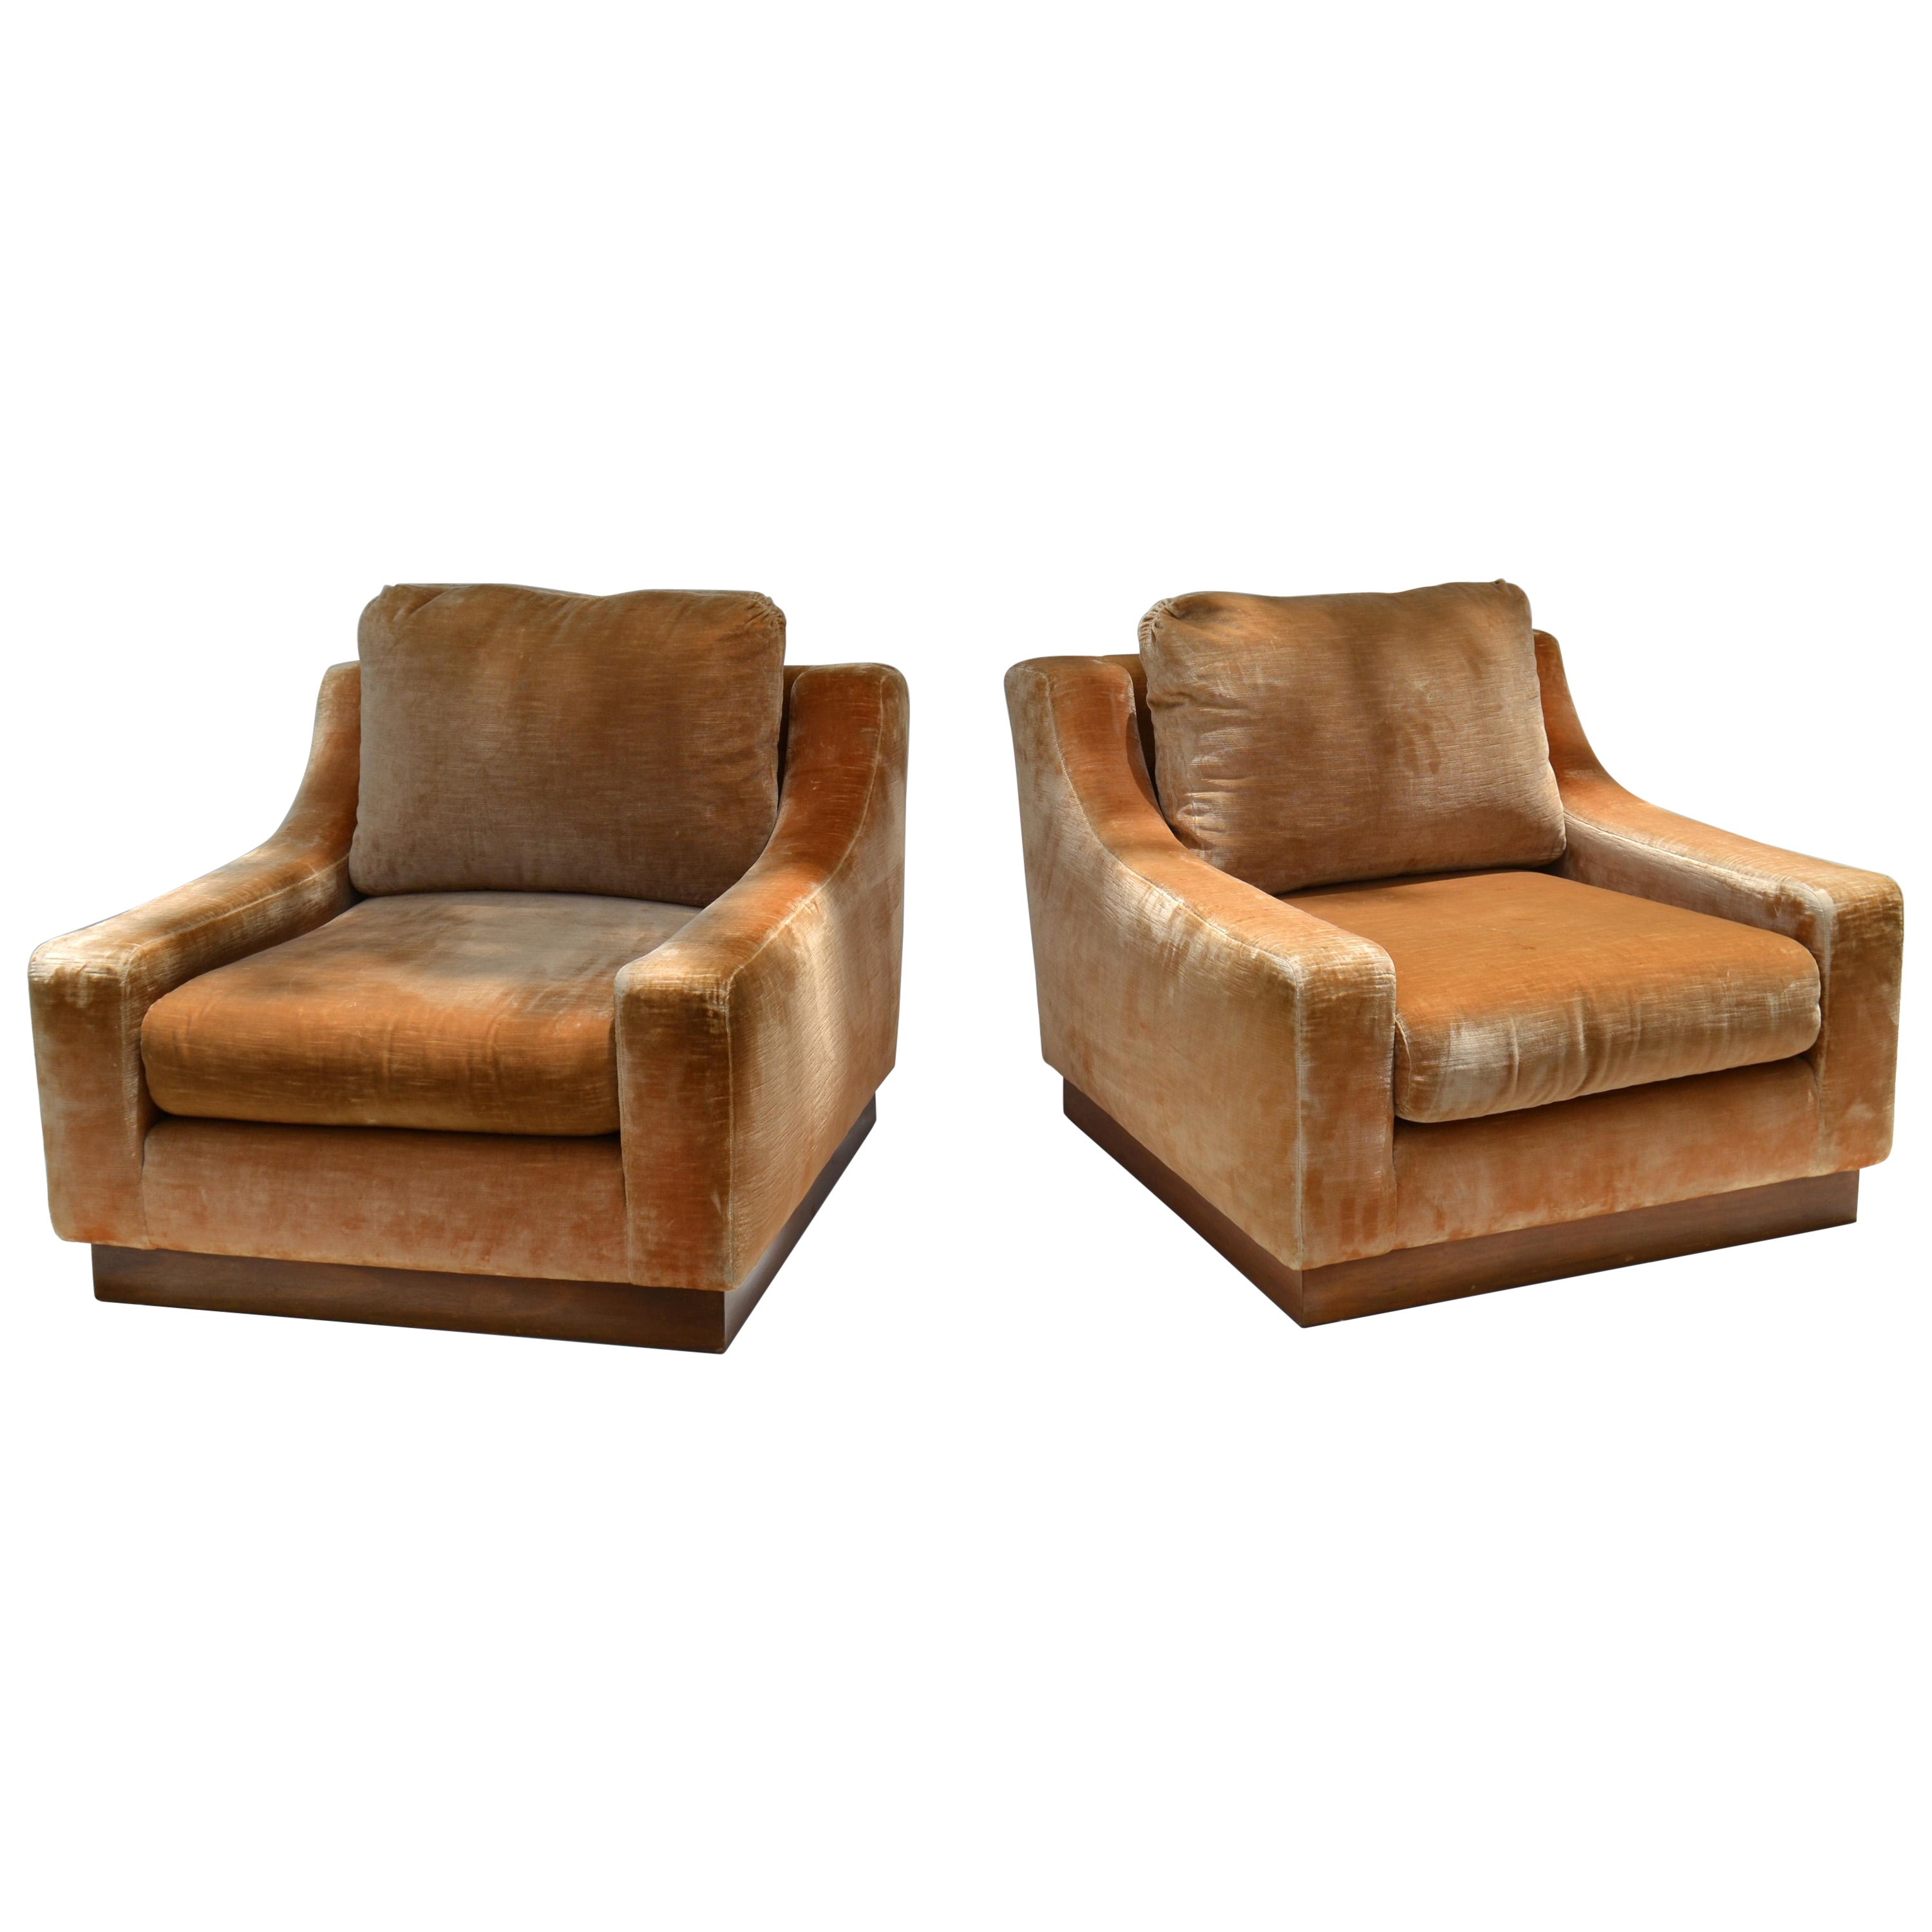 French lounge Mid-Century Modern Beige Corduroy & Wood Lounge Chair Pair